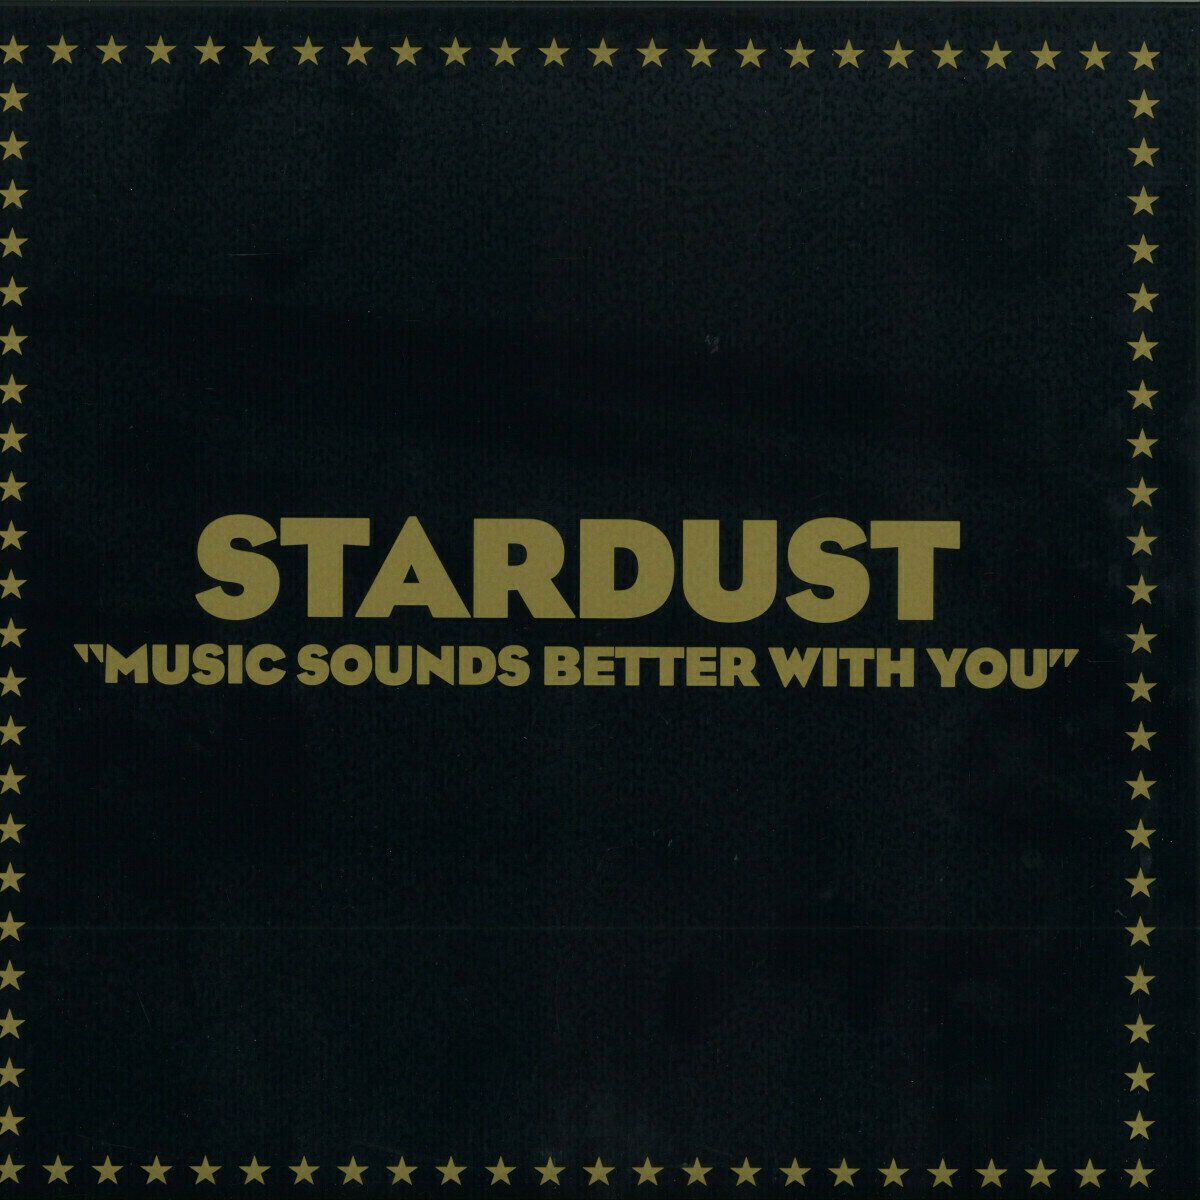 Stardust - Music Sounds Better With You (12" Vinyl) Stardust